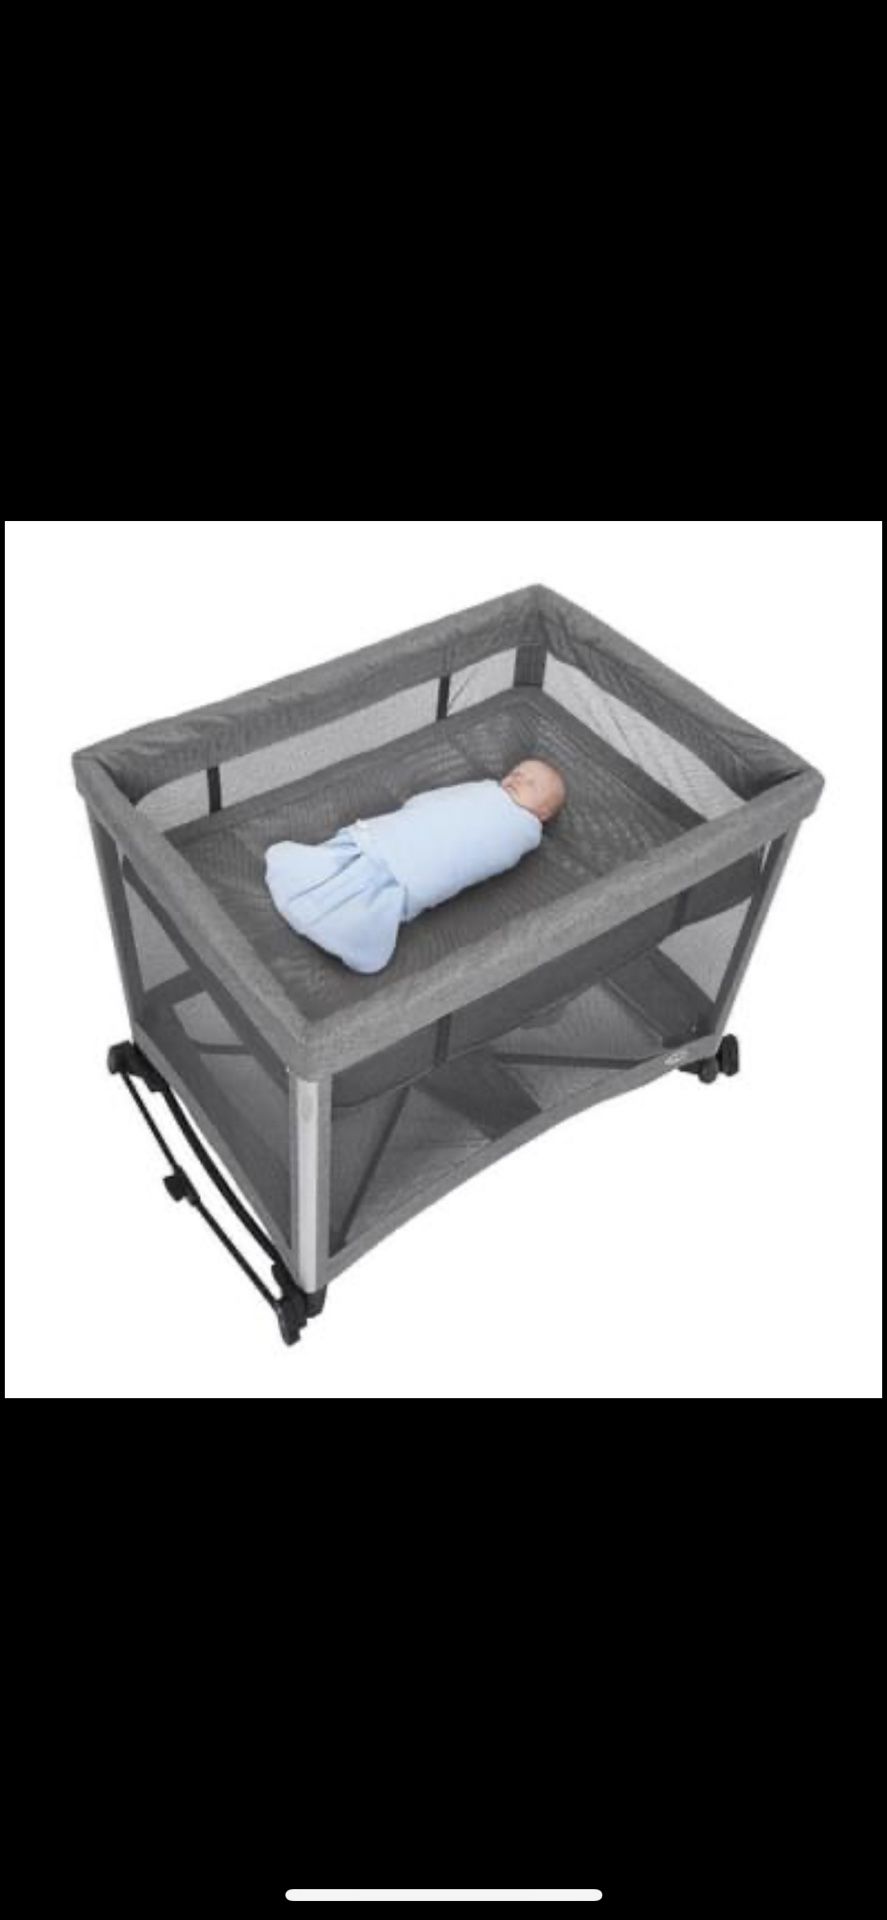 HALO 3-in-1 DreamNest Plus Bassinet + Changing Table